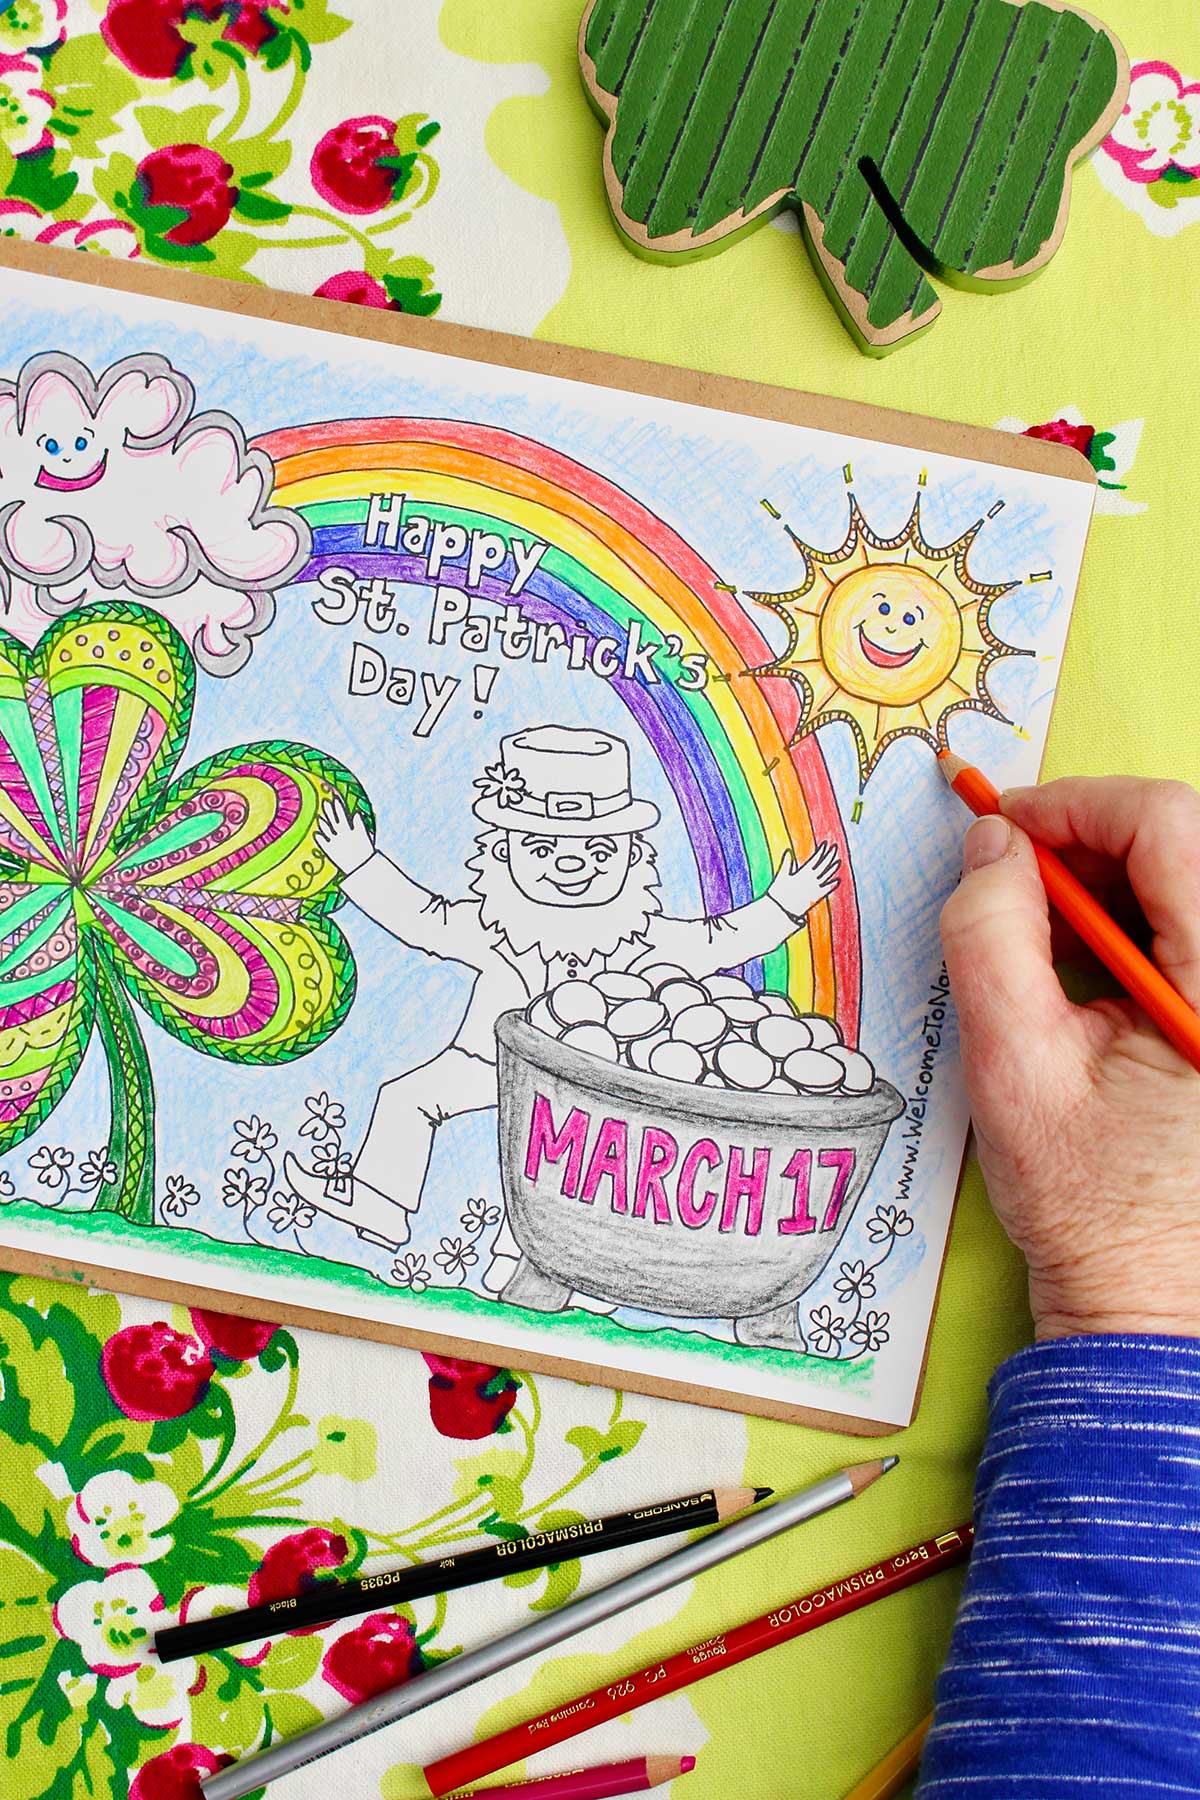 Hand coloring in the sun on St. Patrick's Day coloring page.